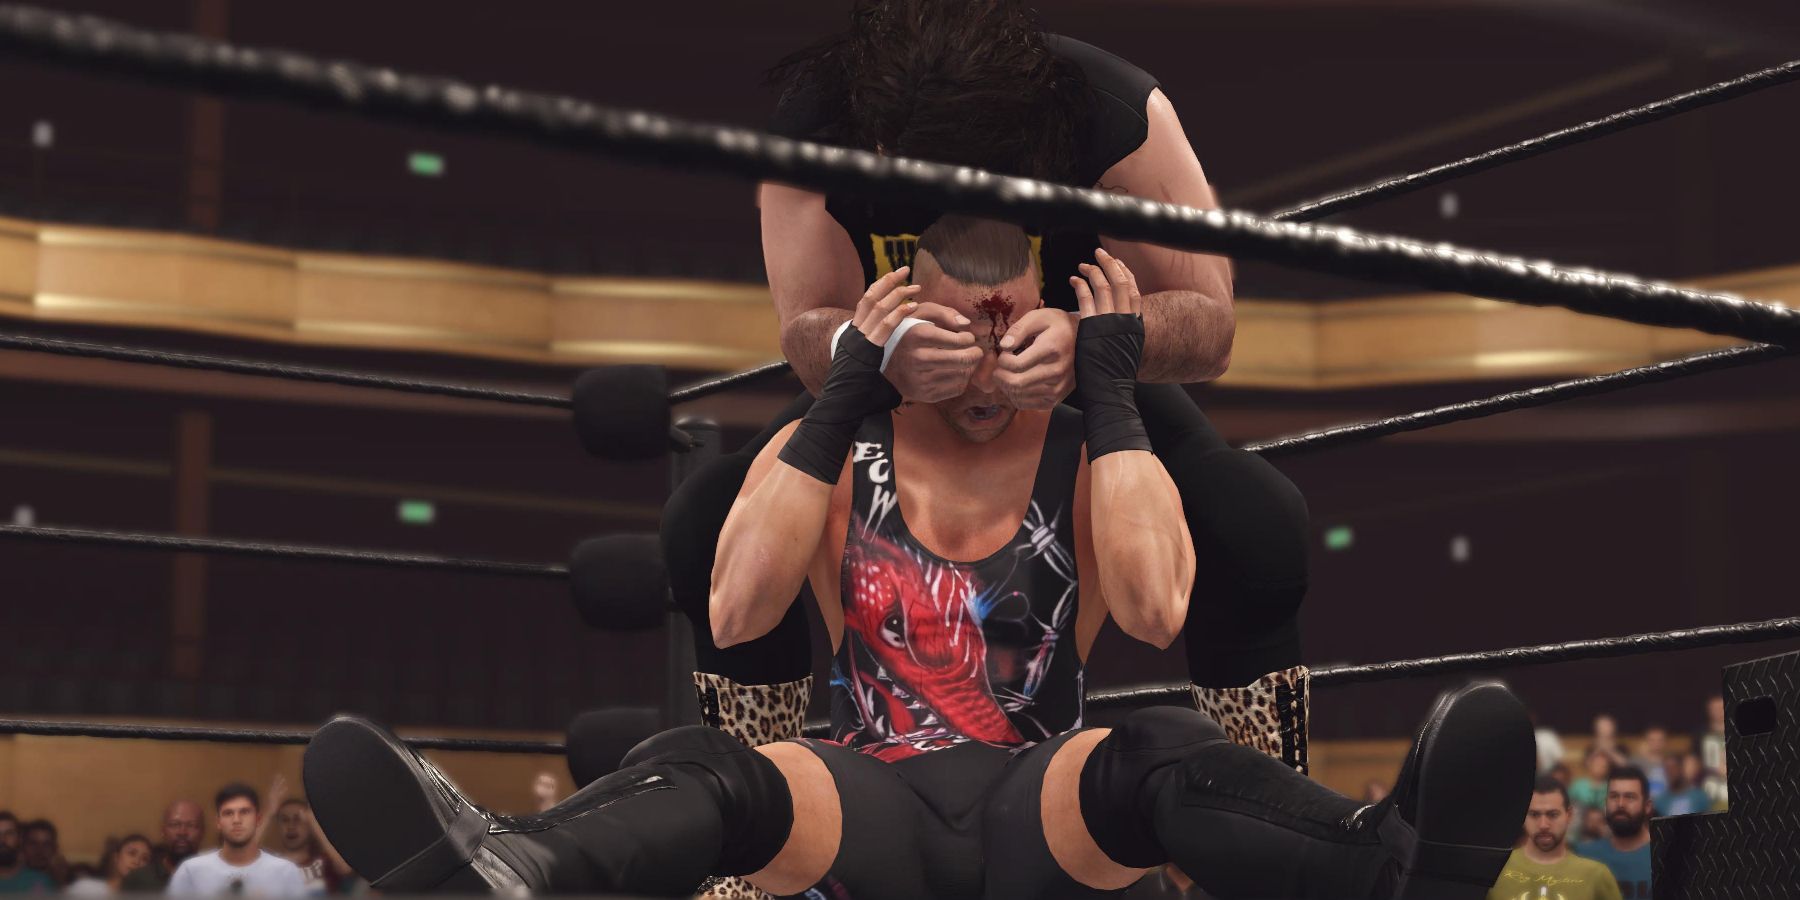 Cactus Jack attacking RVD's face